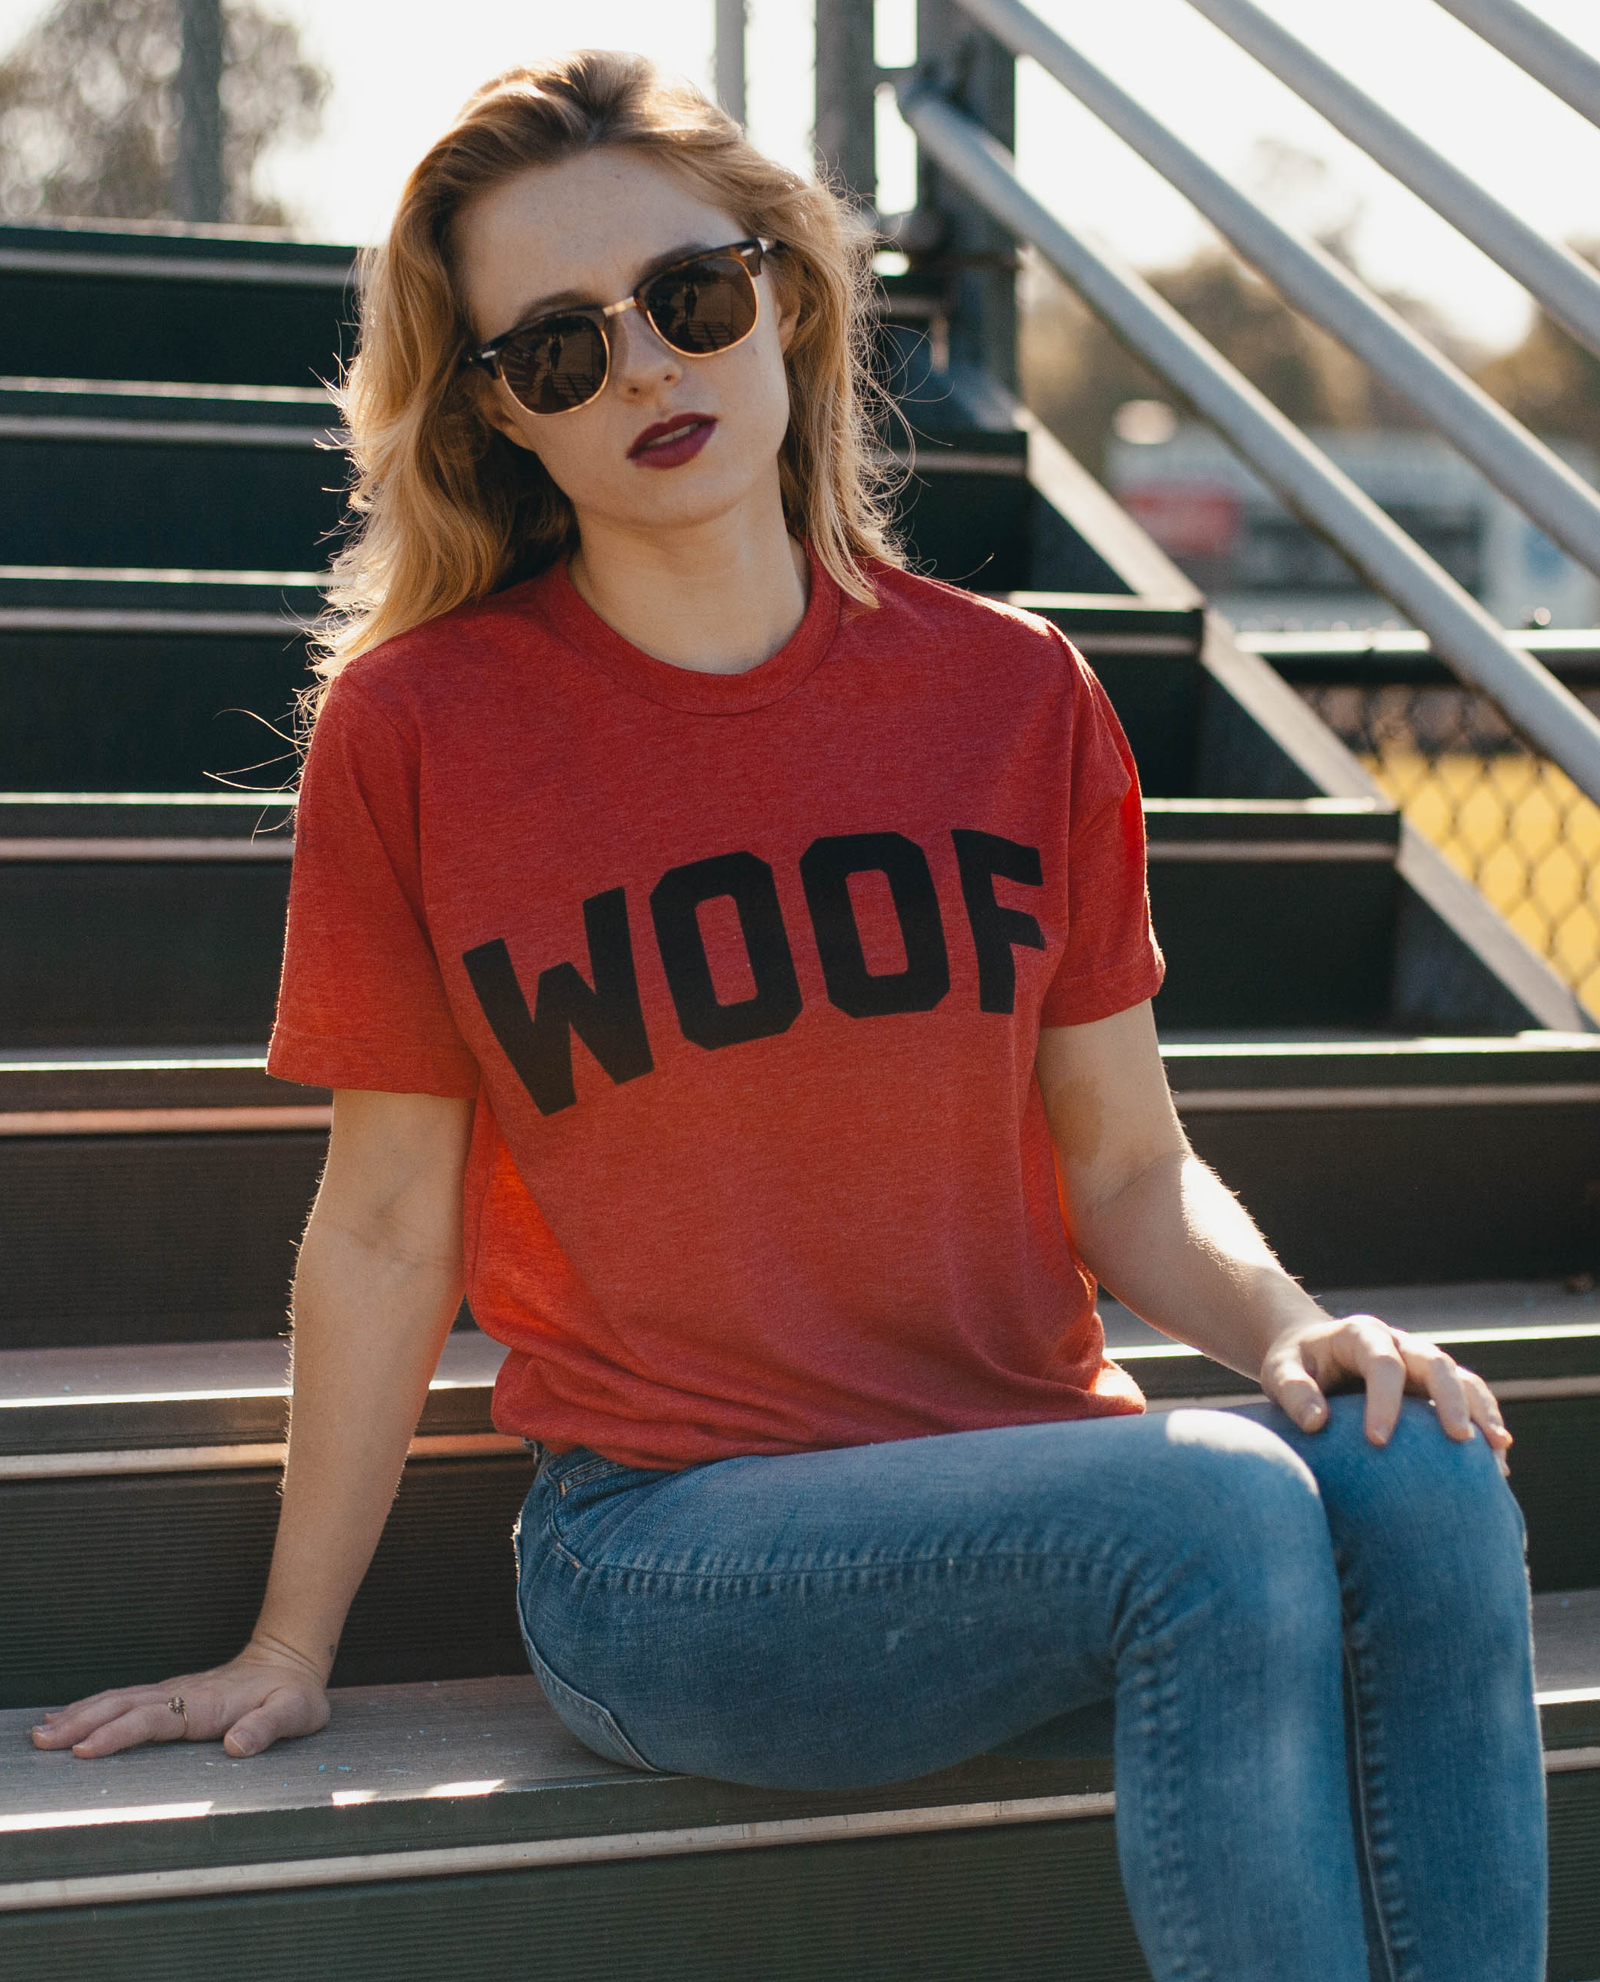 Woman in sunglasses sitting on steps and wearing red WOOF shirt